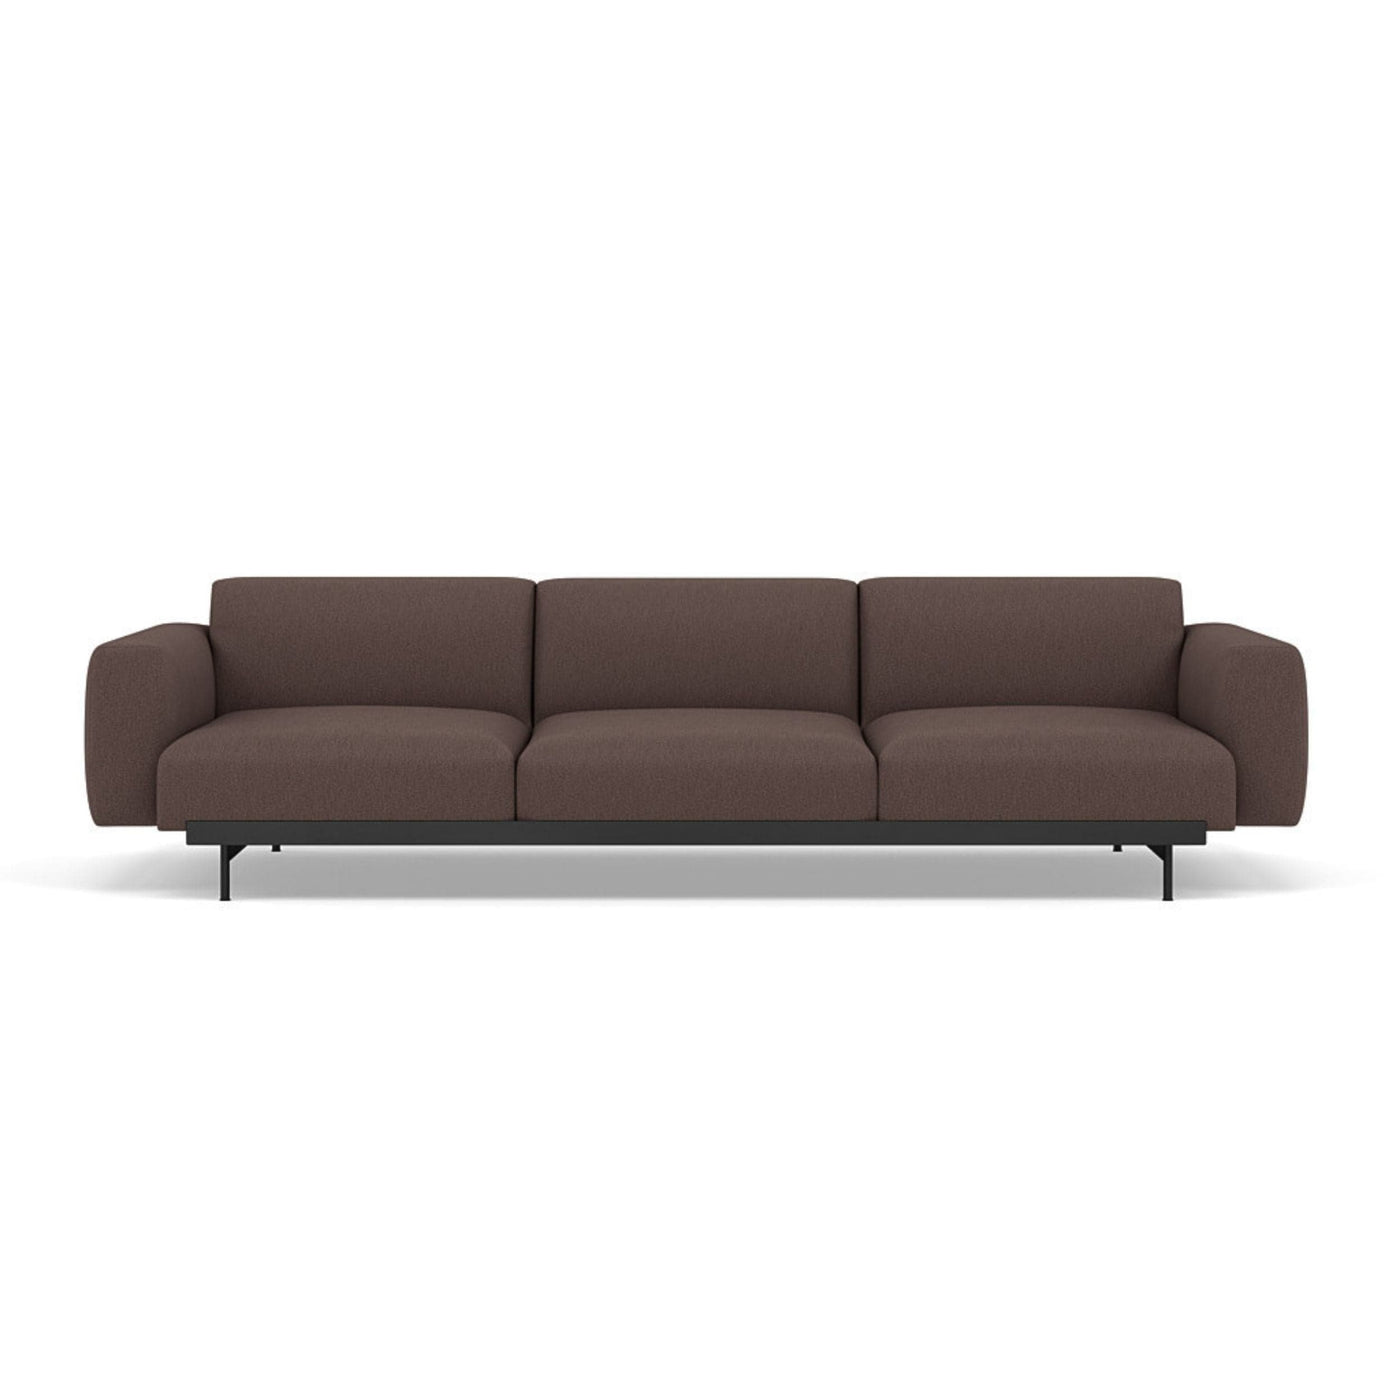 Muuto In Situ Sofa 3 seater configuration 1 in clay 6 fabric. Made to order at someday designs. #colour_clay-6-red-brown